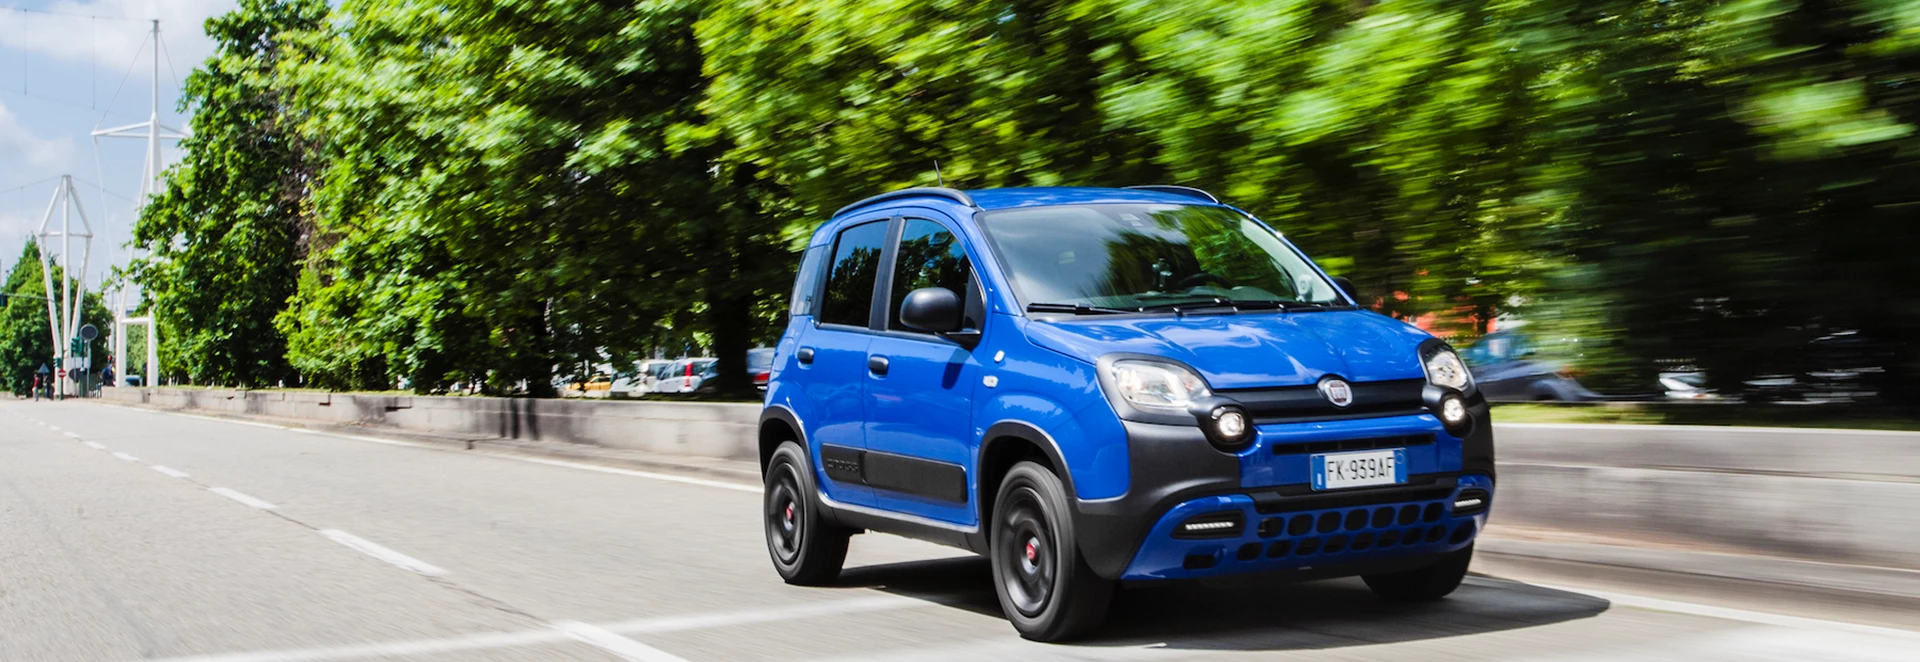 Buyer’s guide to the Fiat Panda